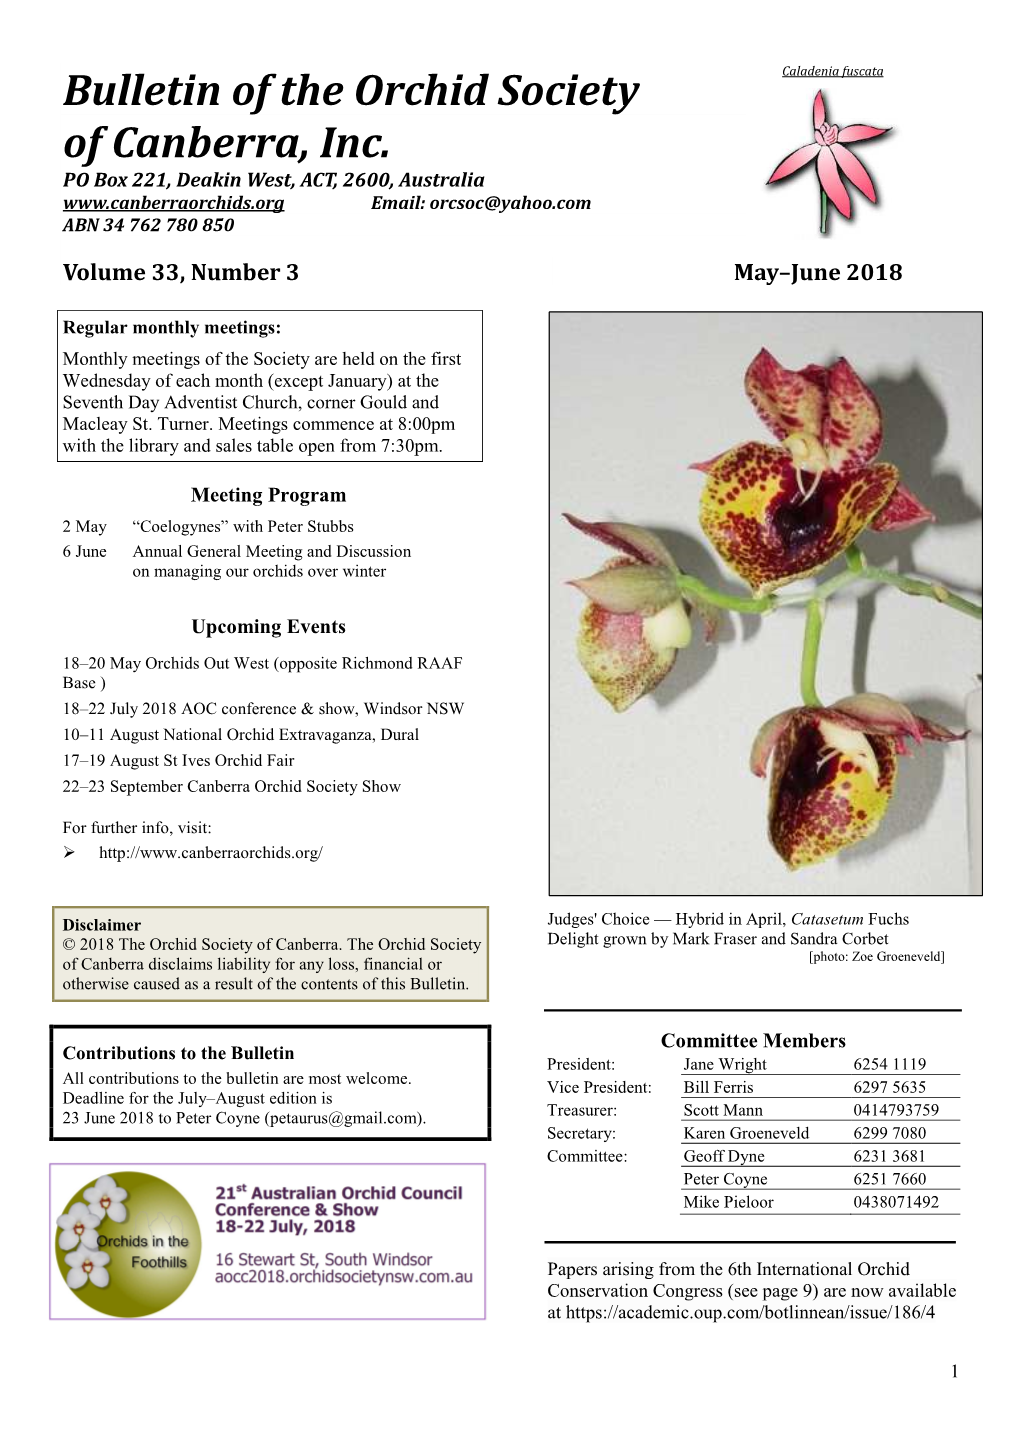 Bulletin of the Orchid Society of Canberra, Inc. PO Box 221, Deakin West, ACT, 2600, Australia Email: Orcsoc@Yahoo.Com ABN 34 762 780 850